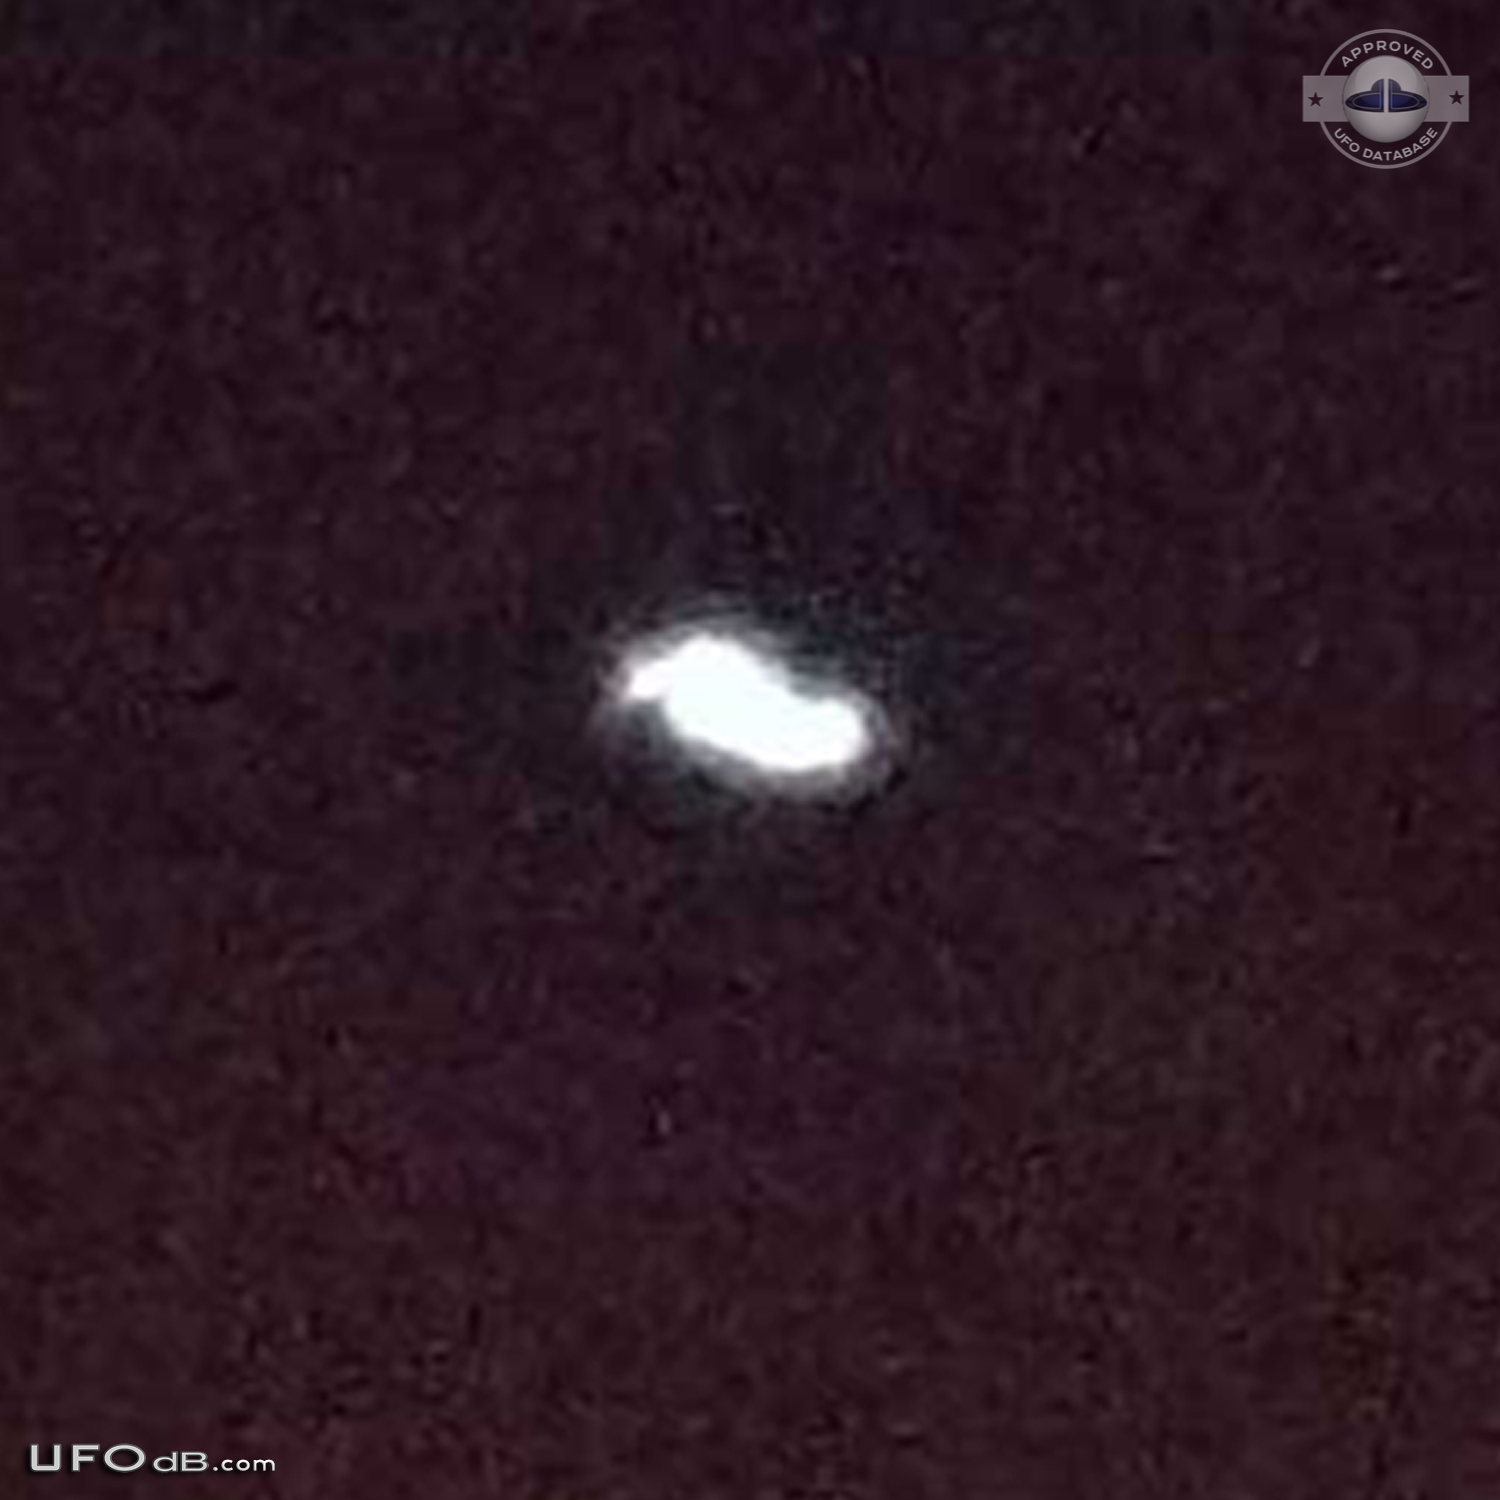 Silent UFOs - One red and two white seen on a clear night - UK 2012 UFO Picture #418-3